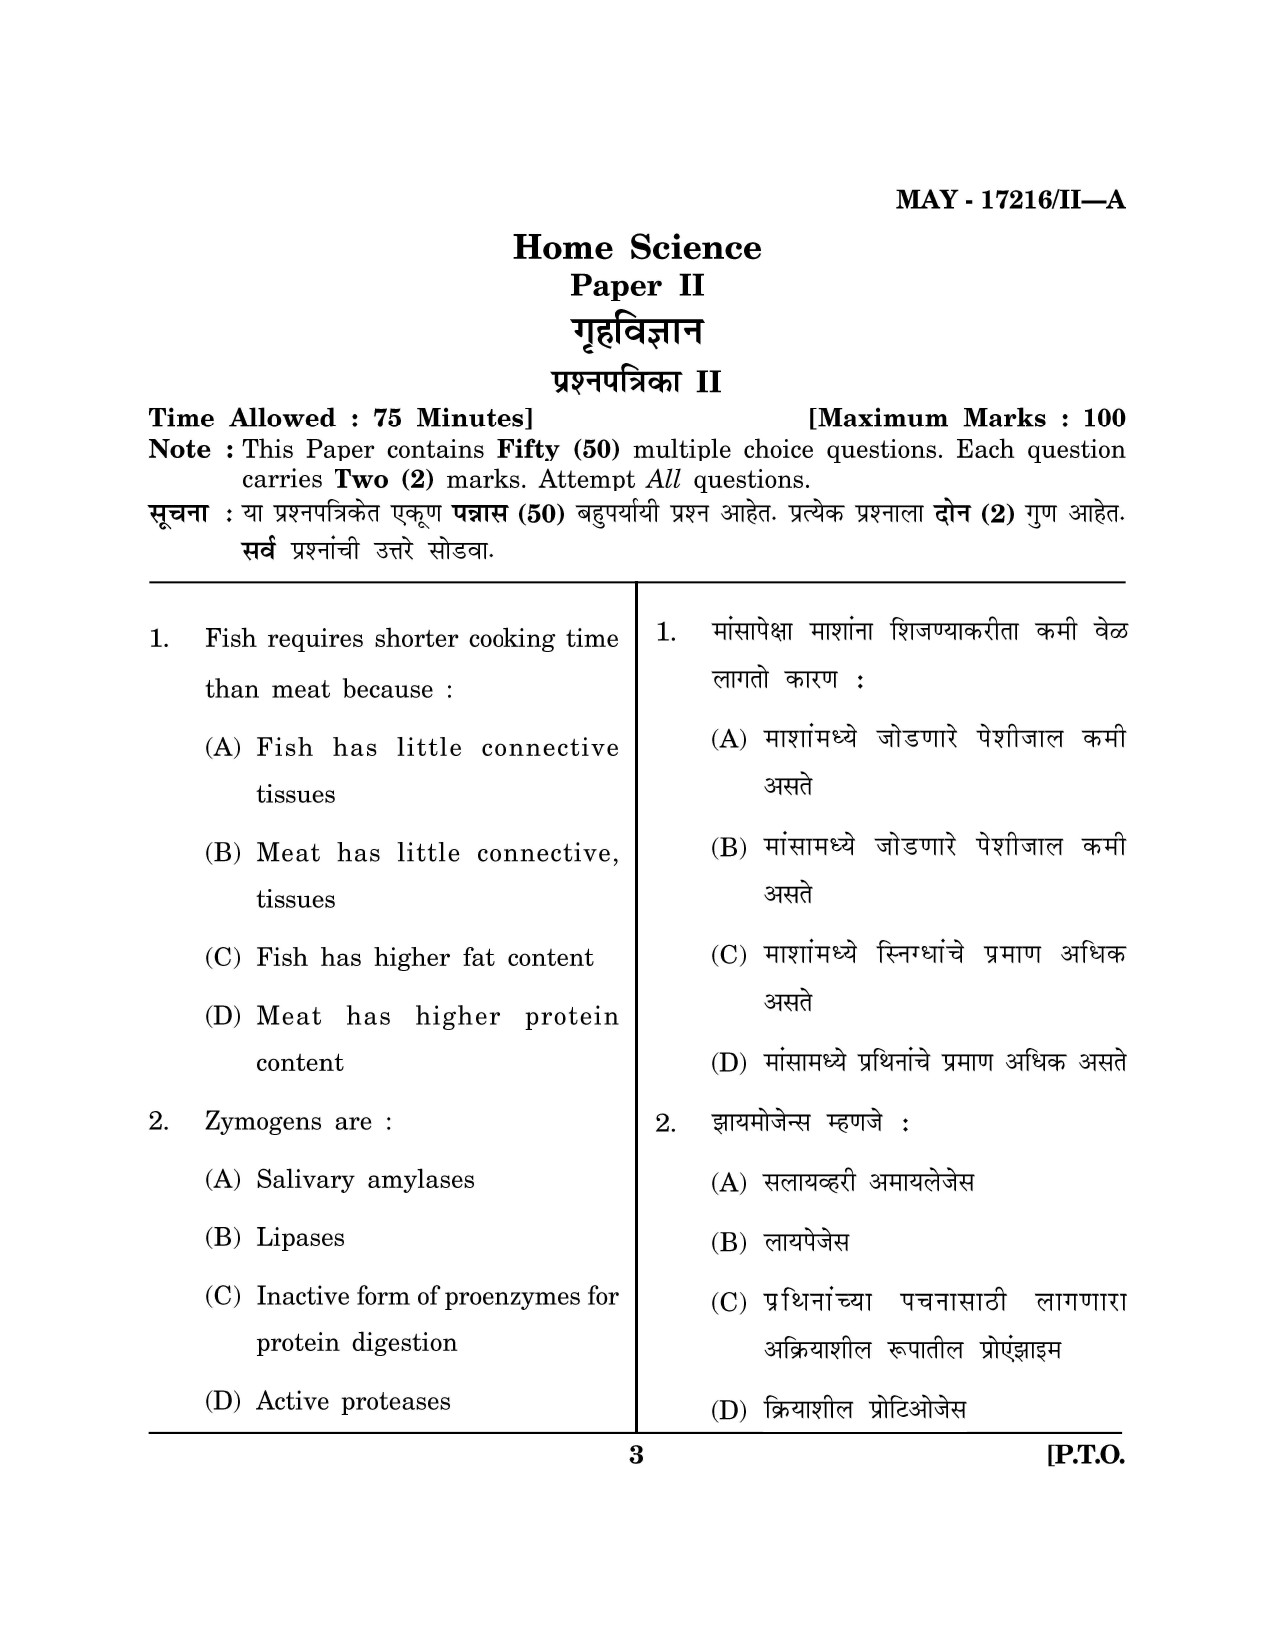 Maharashtra SET Home Science Question Paper II May 2016 2